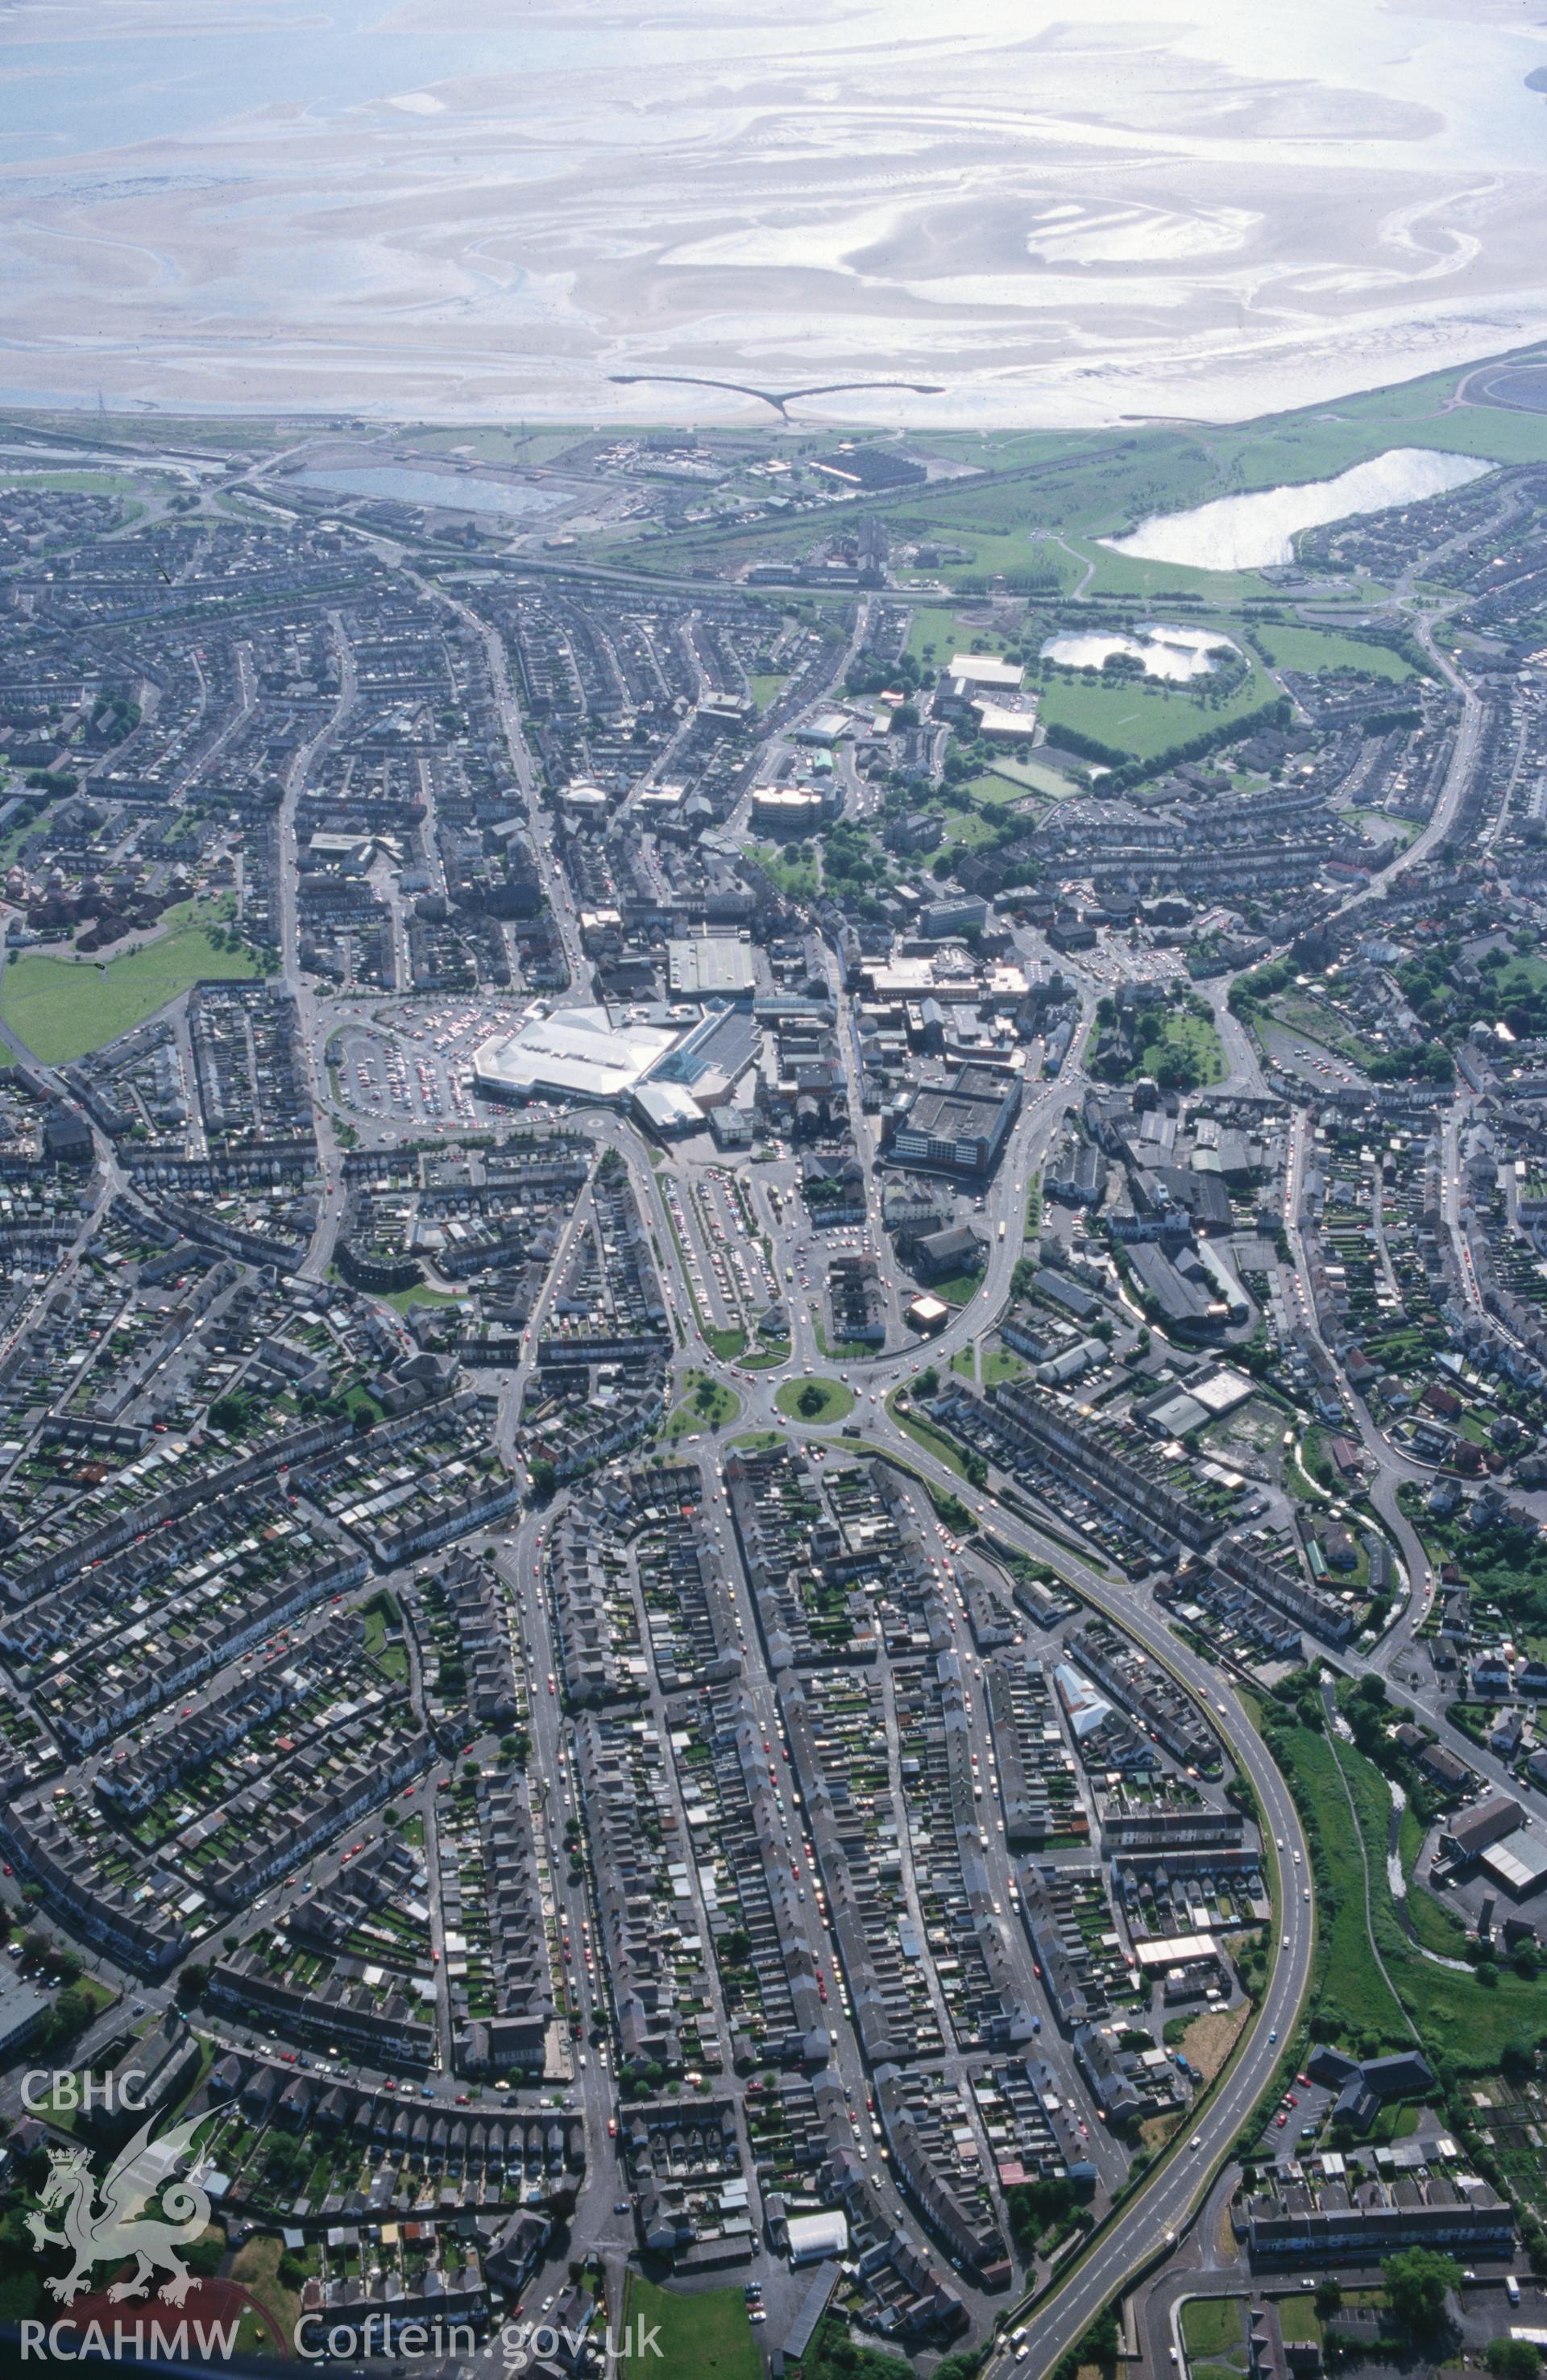 Slide of RCAHMW colour oblique aerial photograph of Llanelli, taken by T.G. Driver, 22/5/2000.